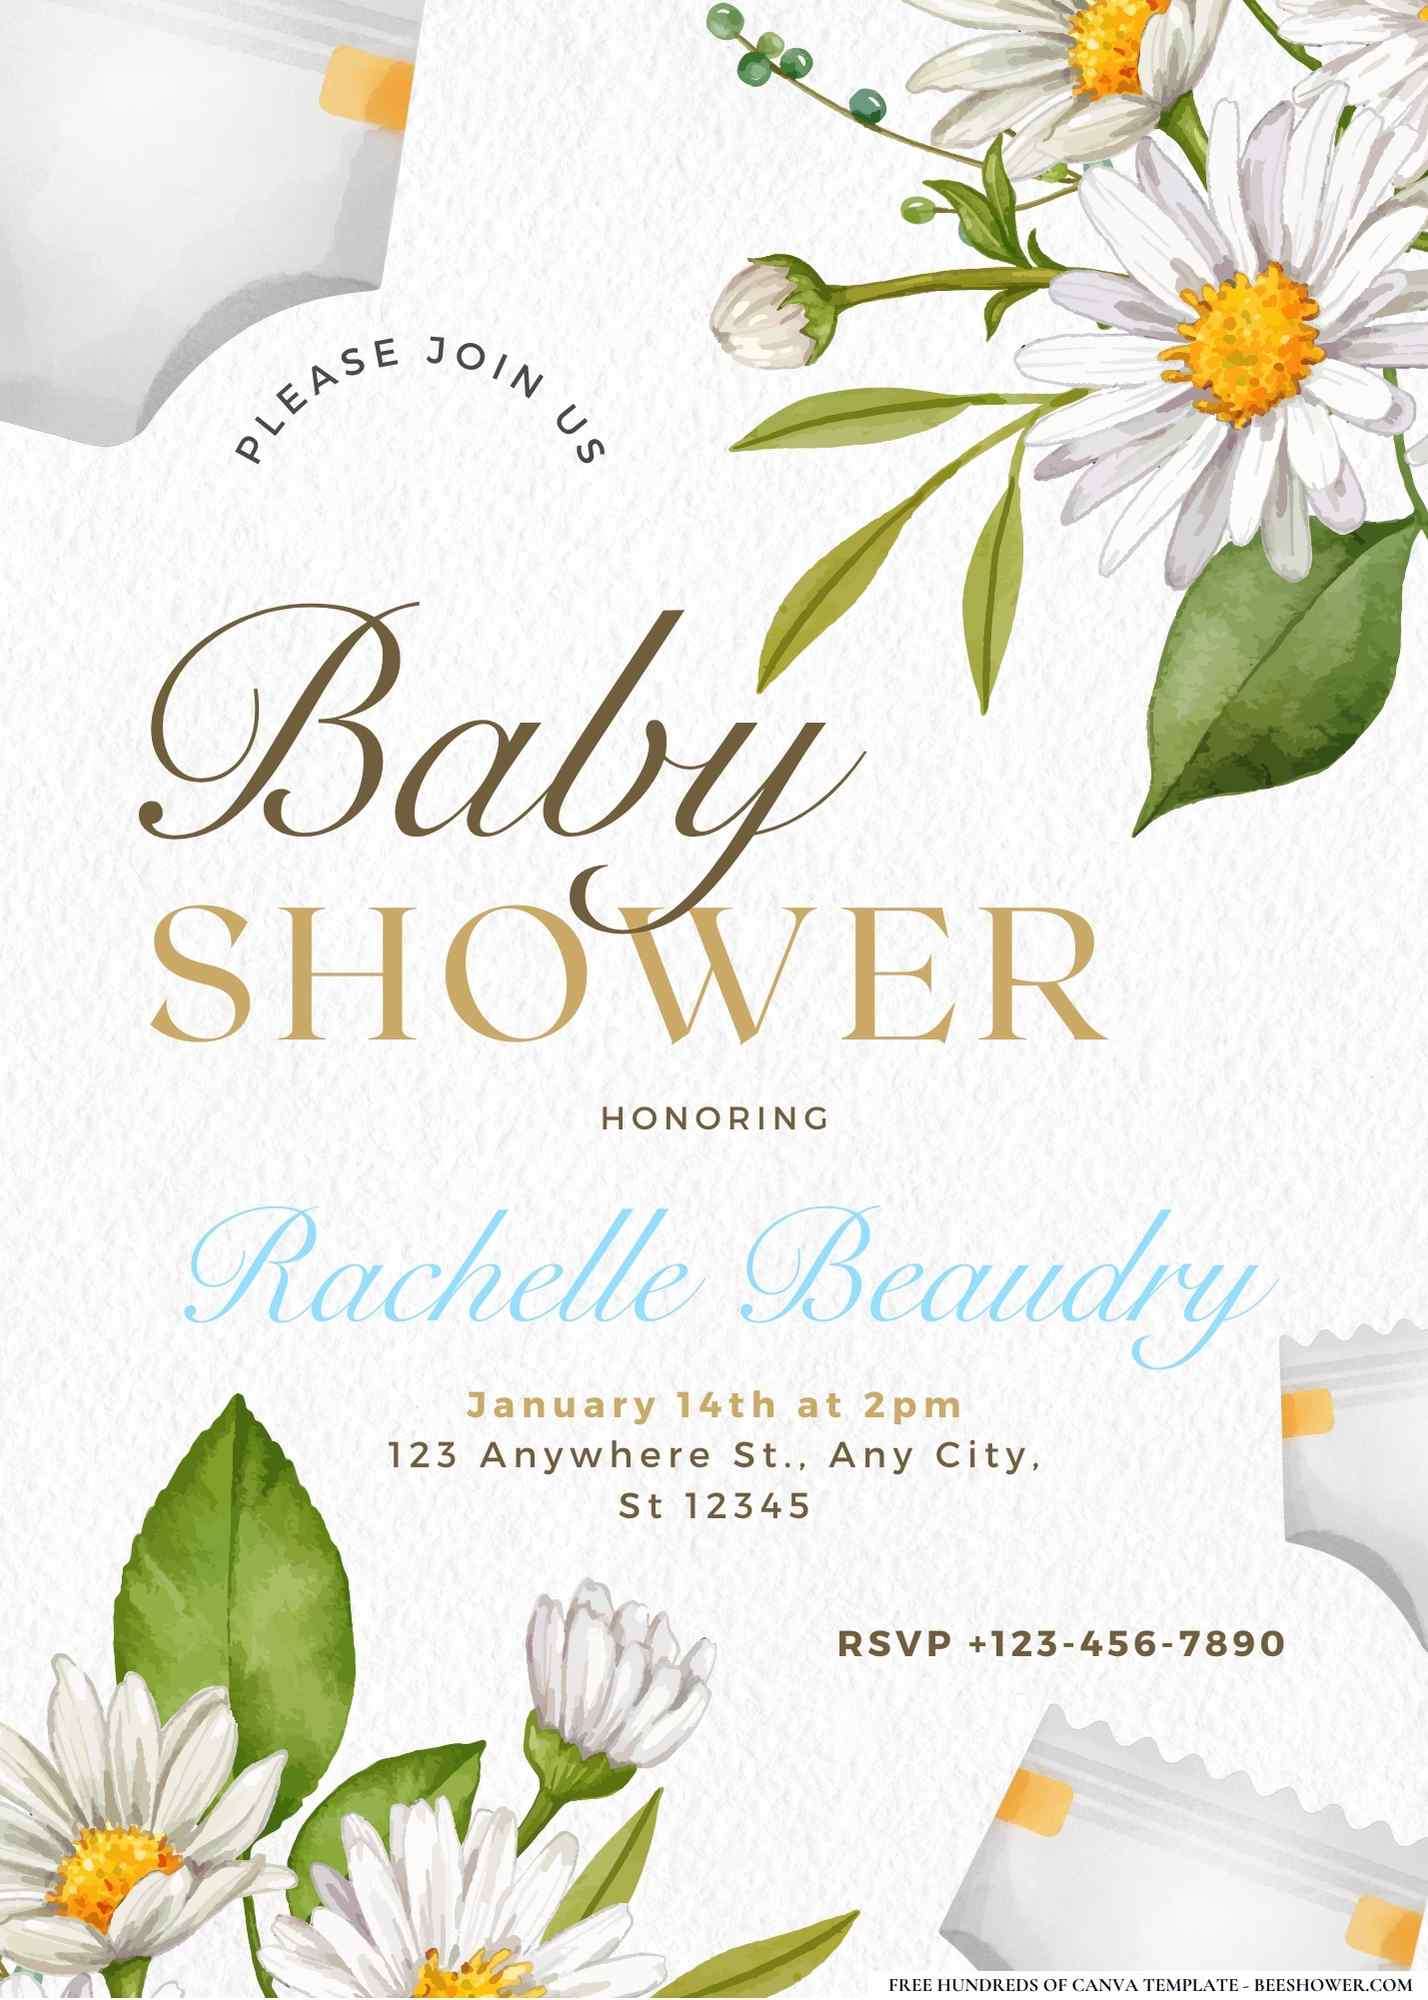 Daisy Dreams and Diapers Baby Shower Invitation